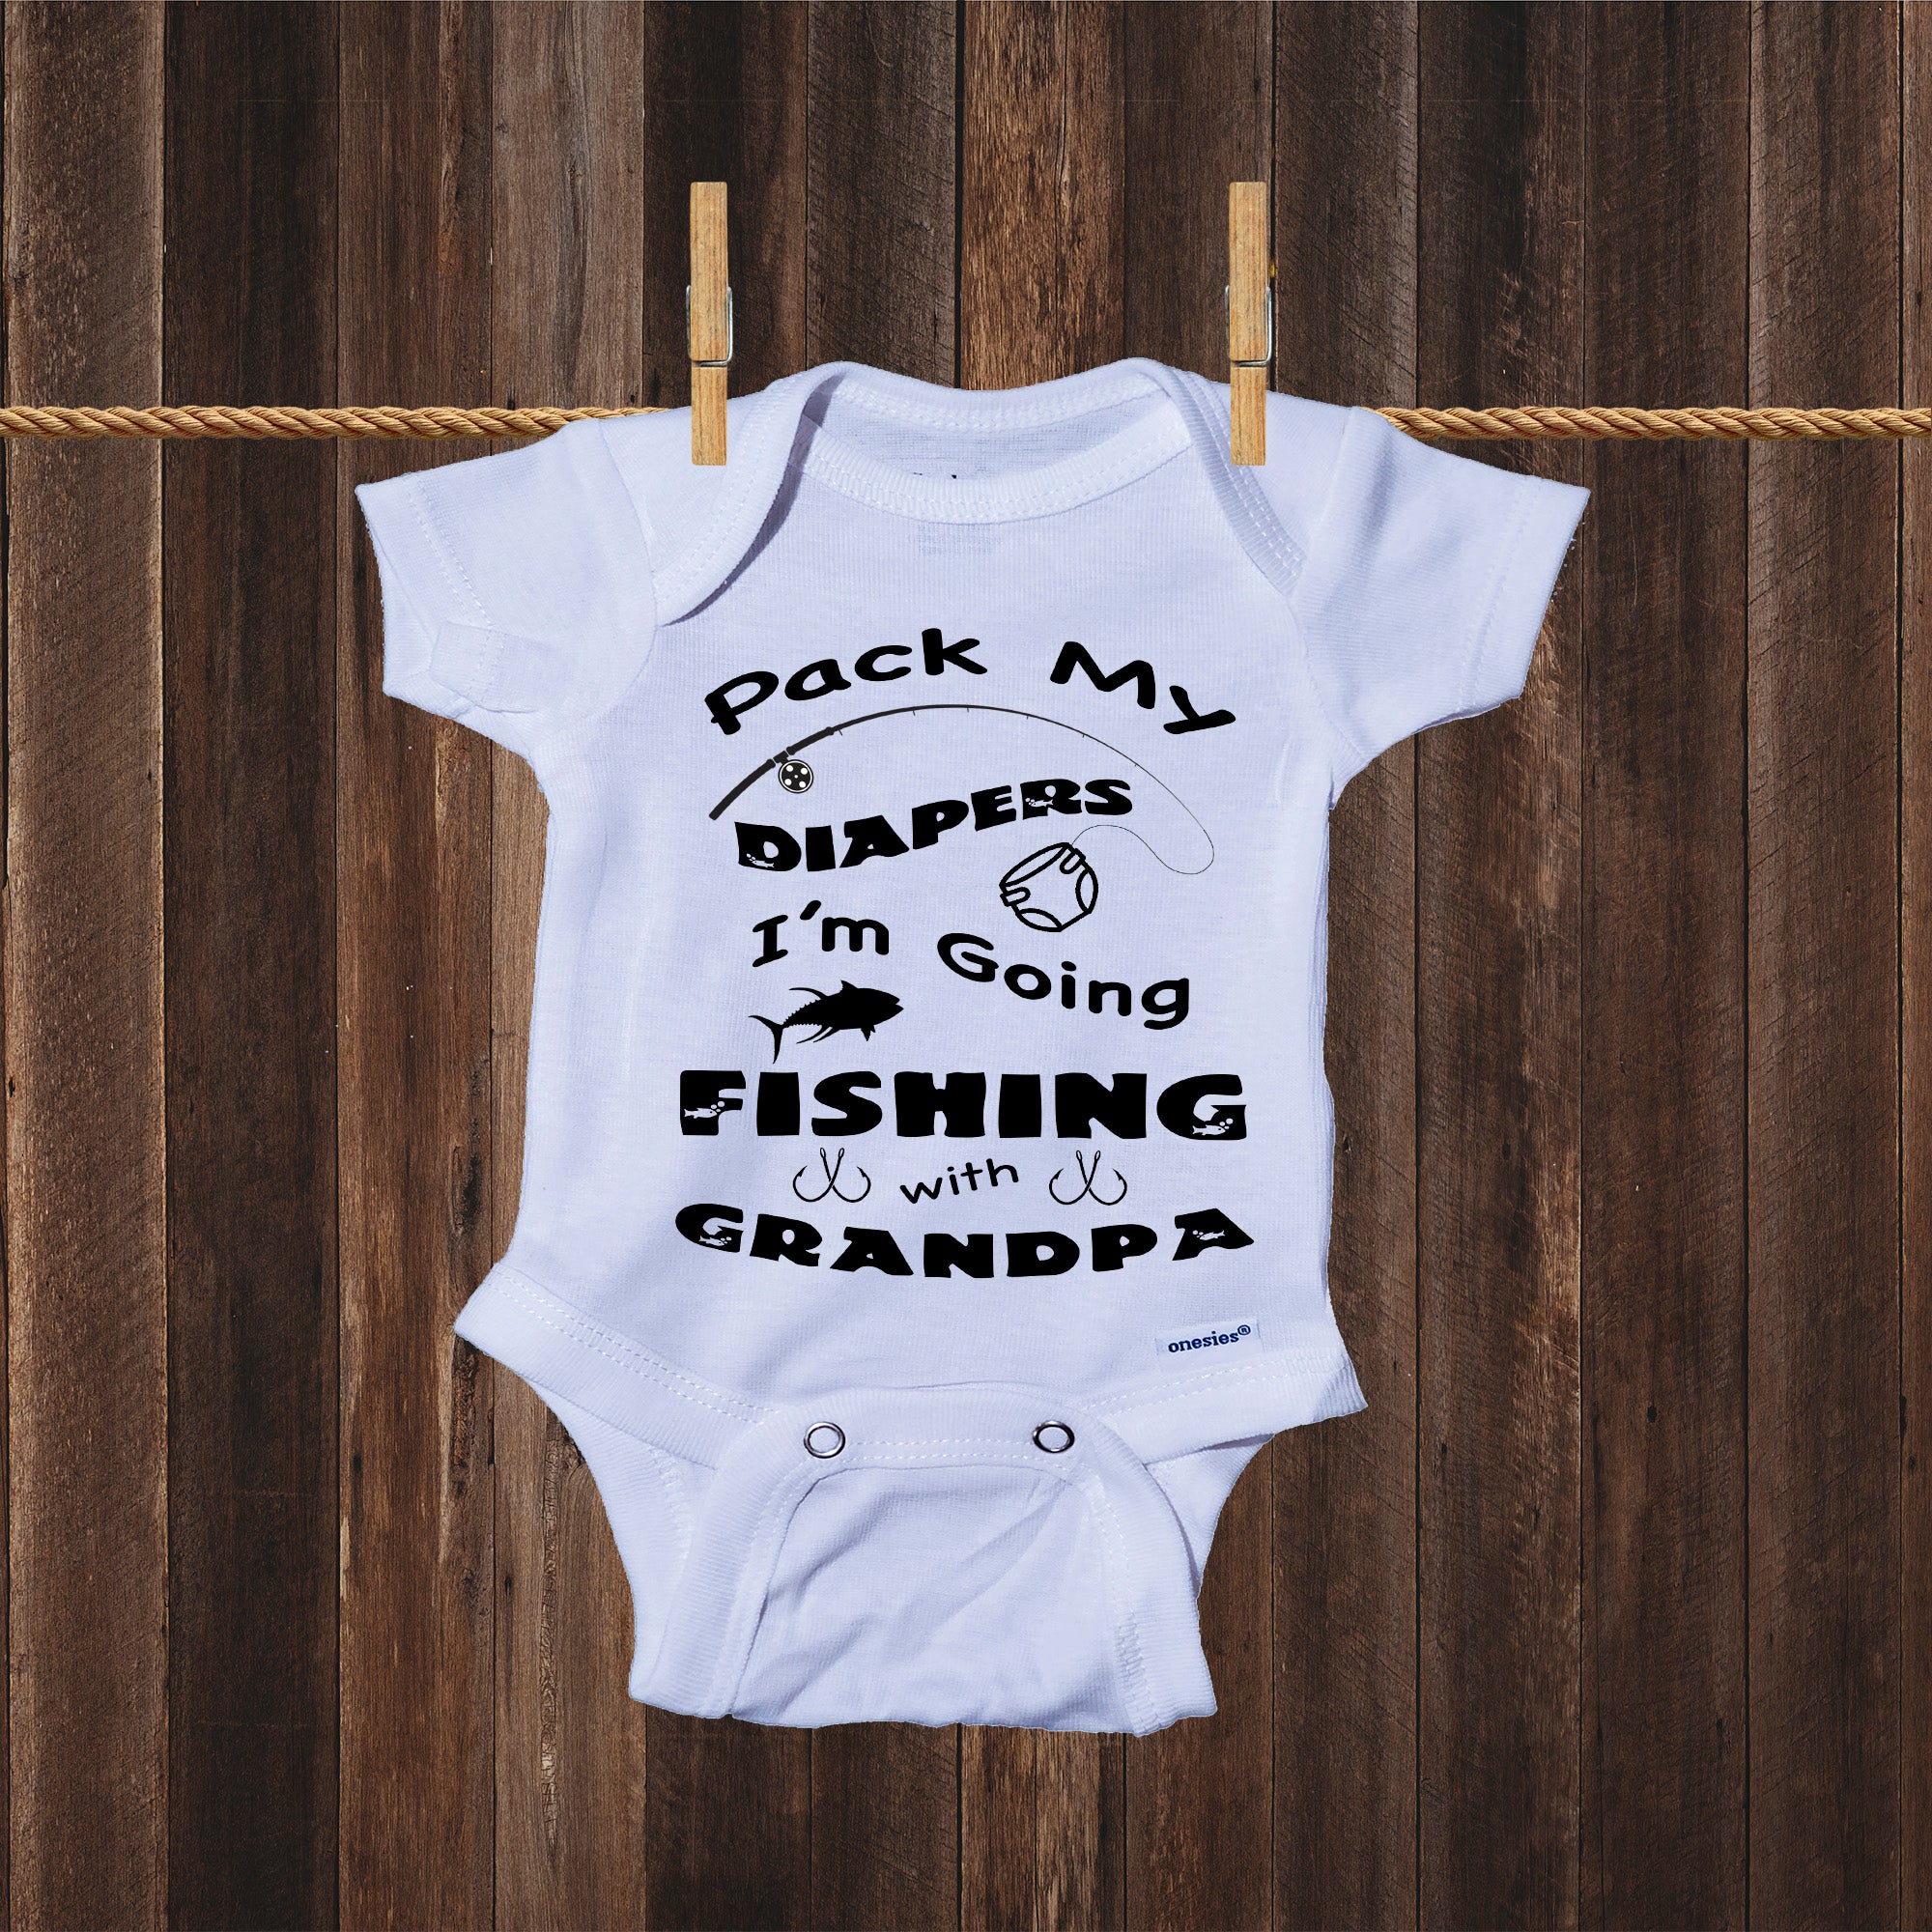 I'm Going Fishing with Daddy Father's Day Baby Onesie – Little